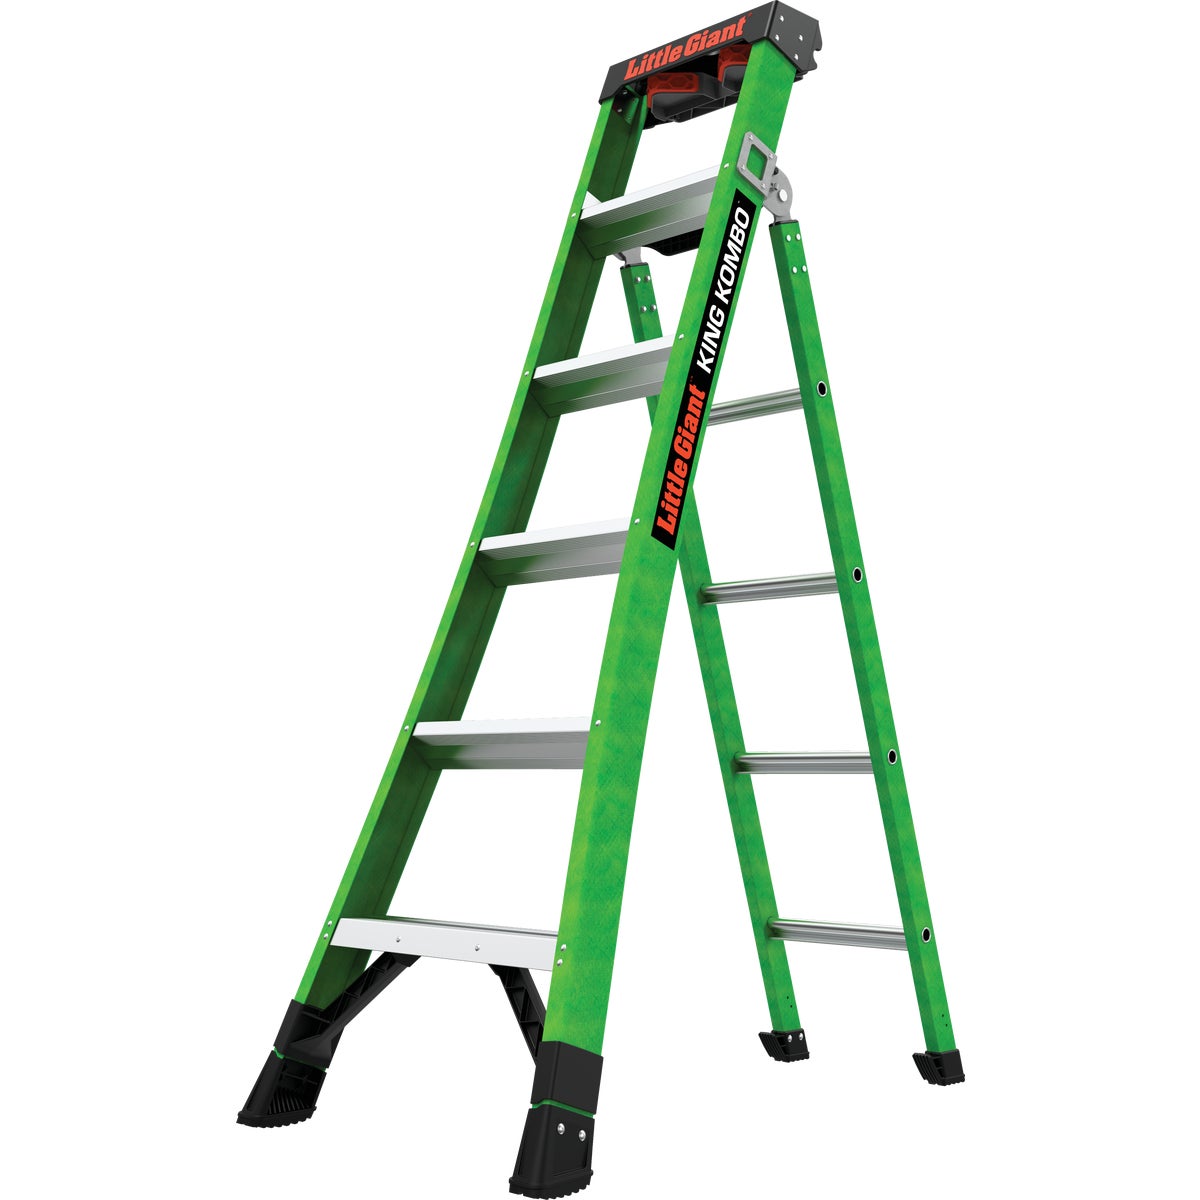 Little Giant King Kombo 5 Ft. To 8 Ft. 3-N-1 All Access Fiberglass Ladder With 375 Lb. Load Capacity Type 1AA Ladder Rating